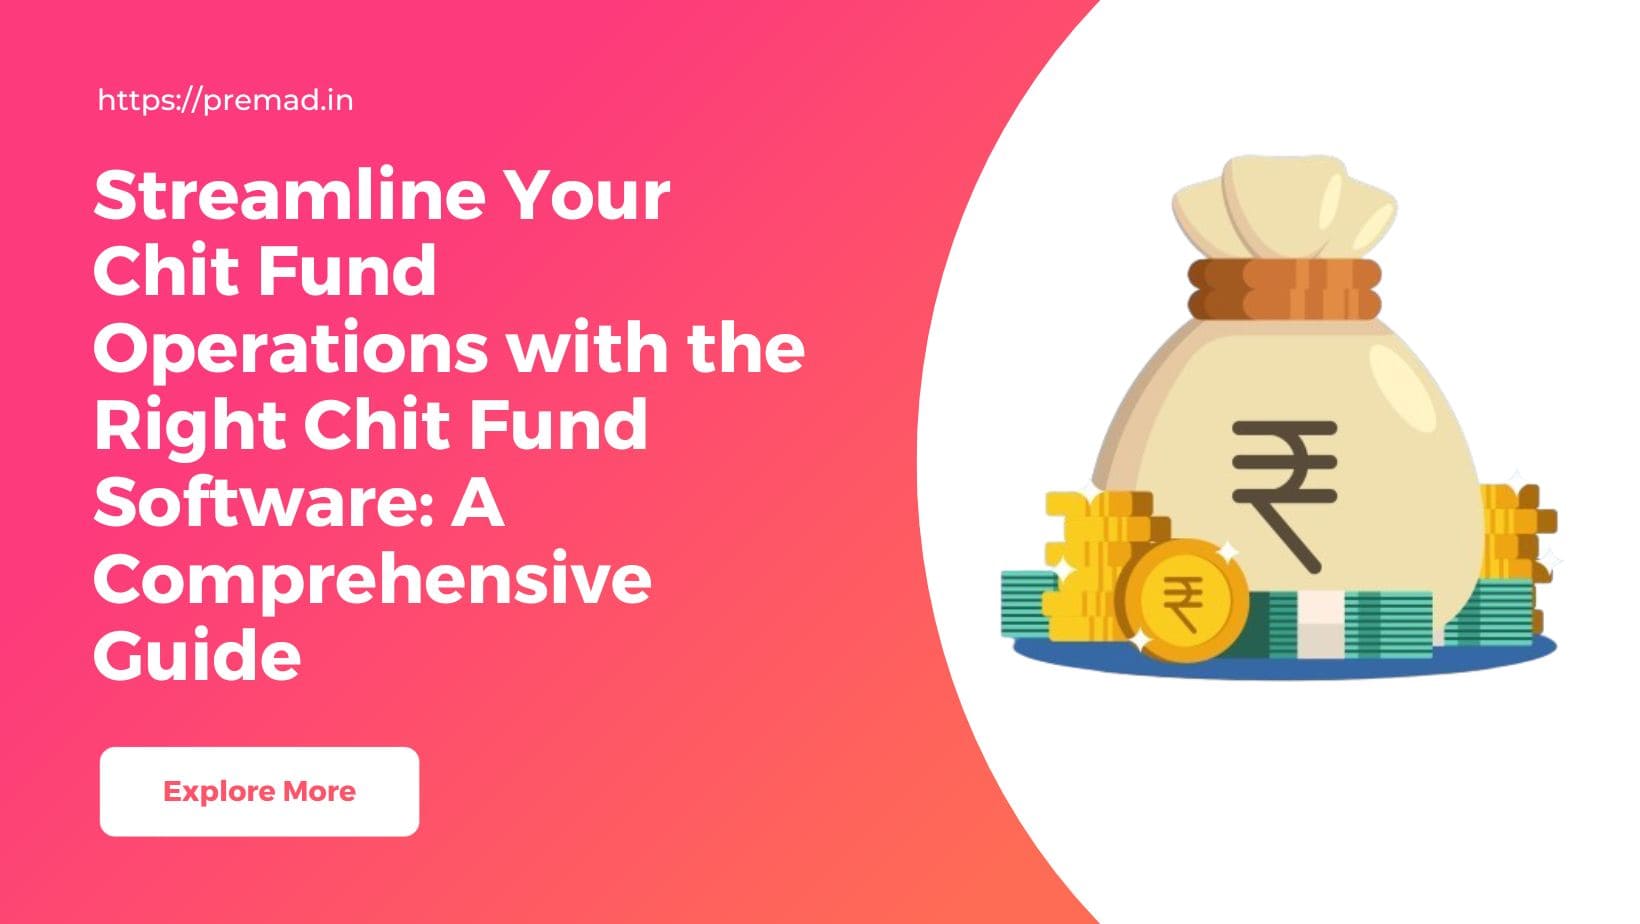 Streamline Your Chit Fund Operations with the Right Chit Fund Software A Comprehensive Guide